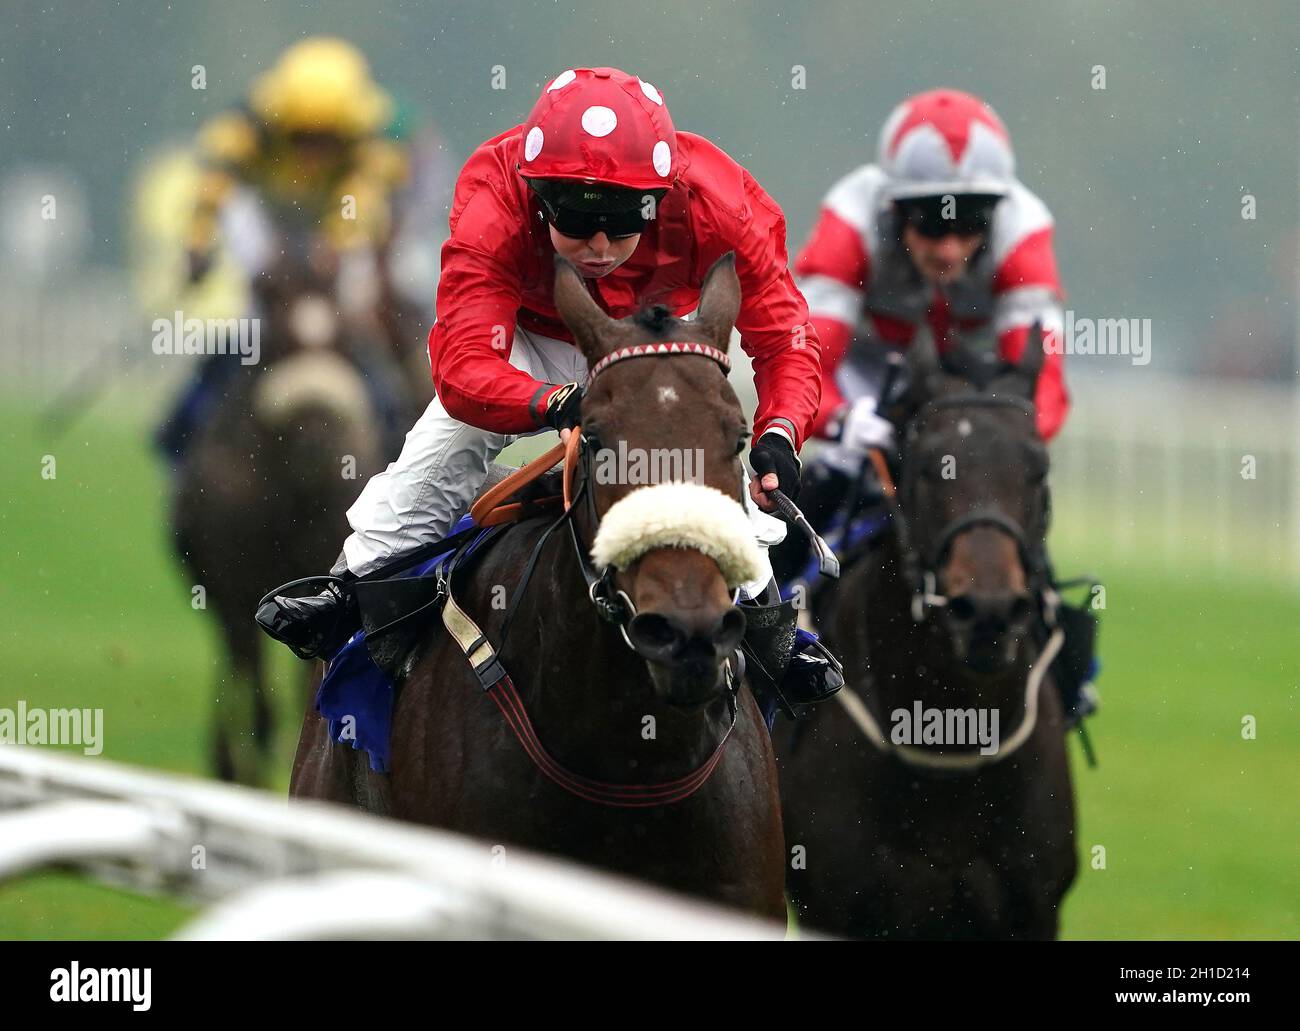 Greenbarn ridden by jockey Connor Beasley wins the Northern Commercials Iveco And Fiat Restricted Novice Stakes at Pontefract Racecourse, West Yorkshire. Picture date: Monday October 18, 2021. Stock Photo